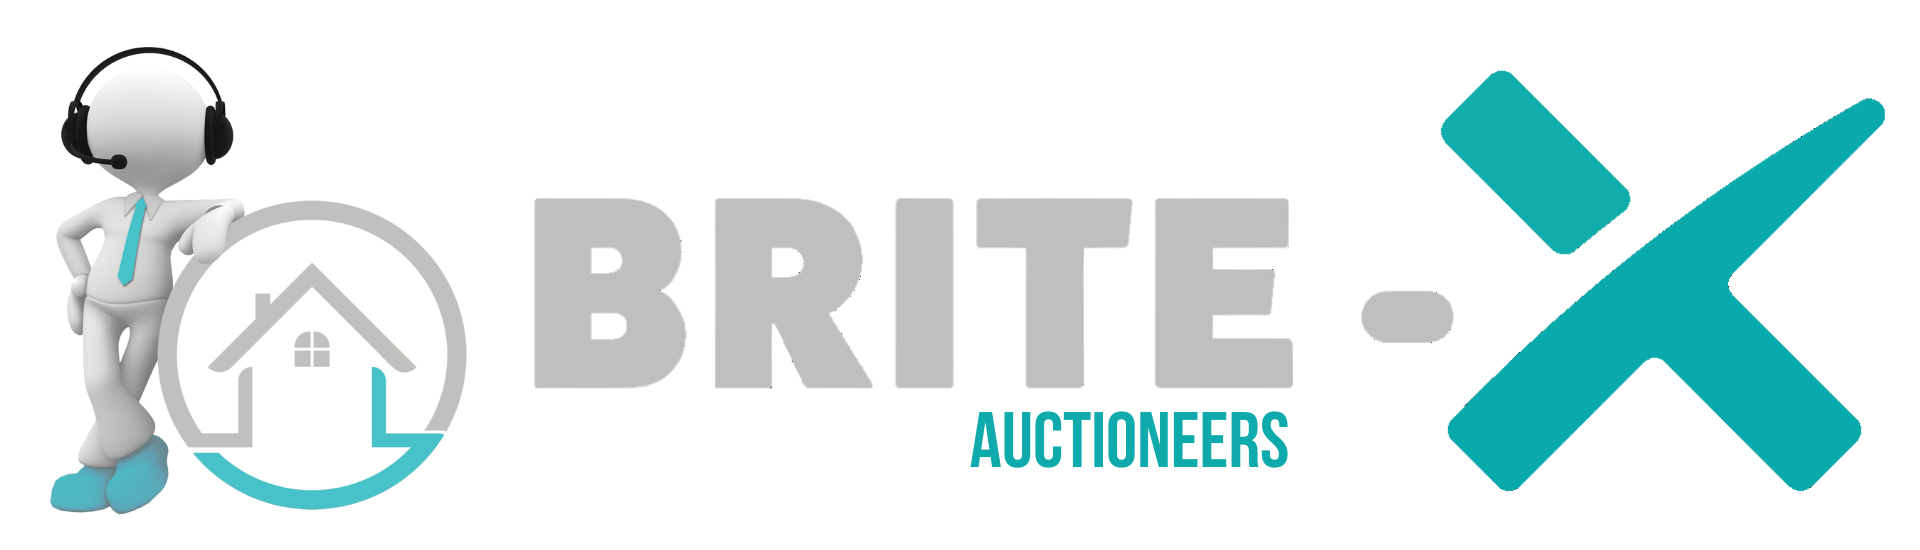 Auctioneers - Real Estate Agent Gauteng - BRITE-X Property Group